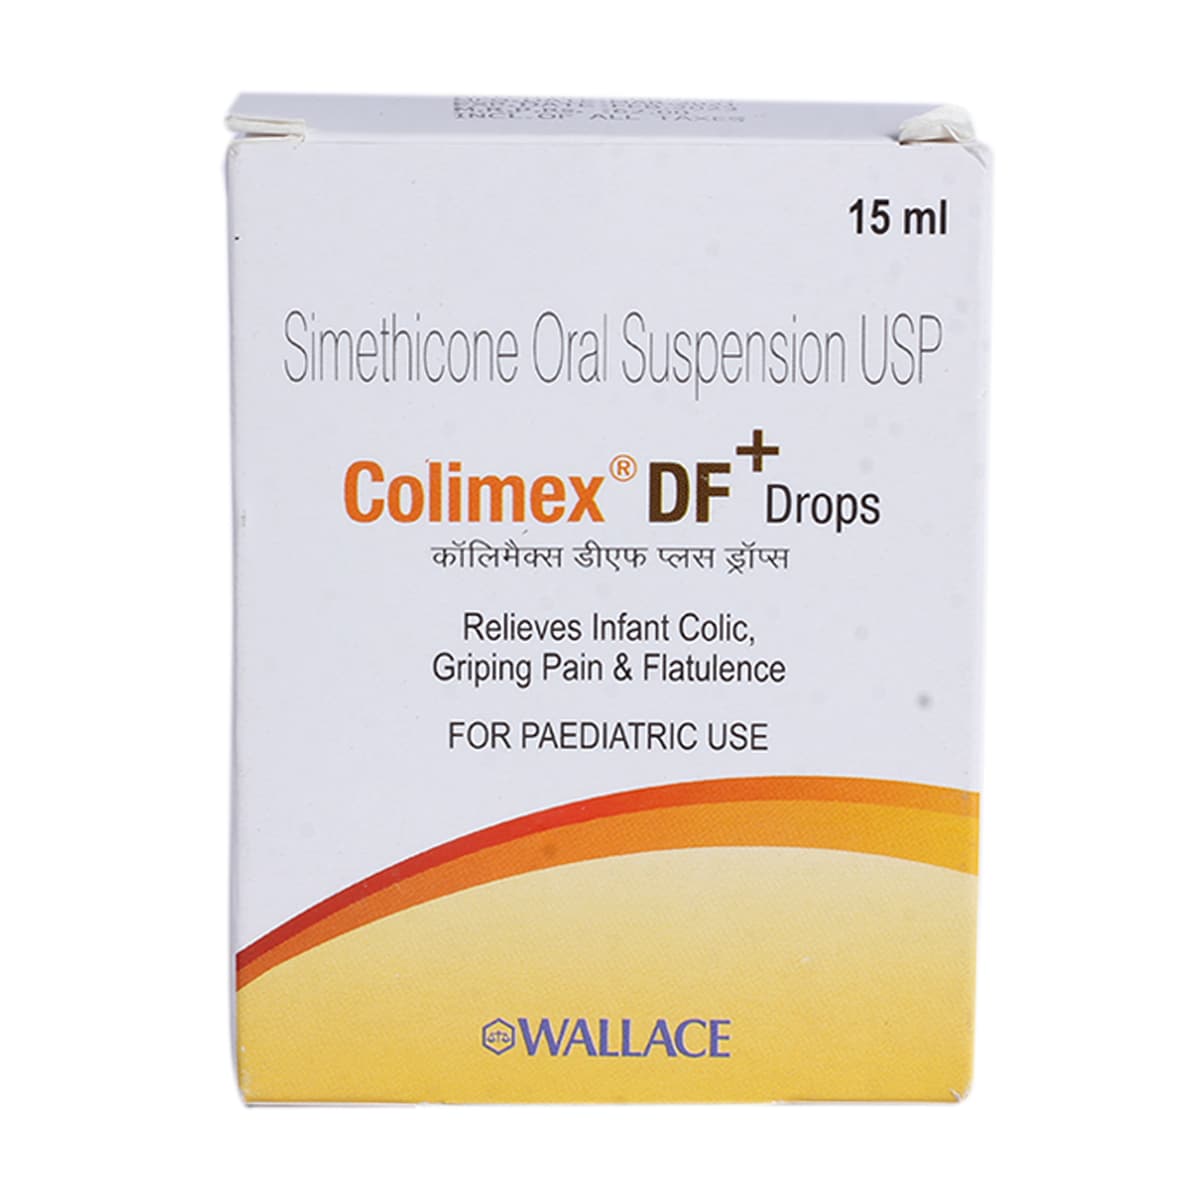 Colimex Df Plus 40mg Drops 15ml Price, Uses, Side Effects, Composition  Apollo Pharmacy